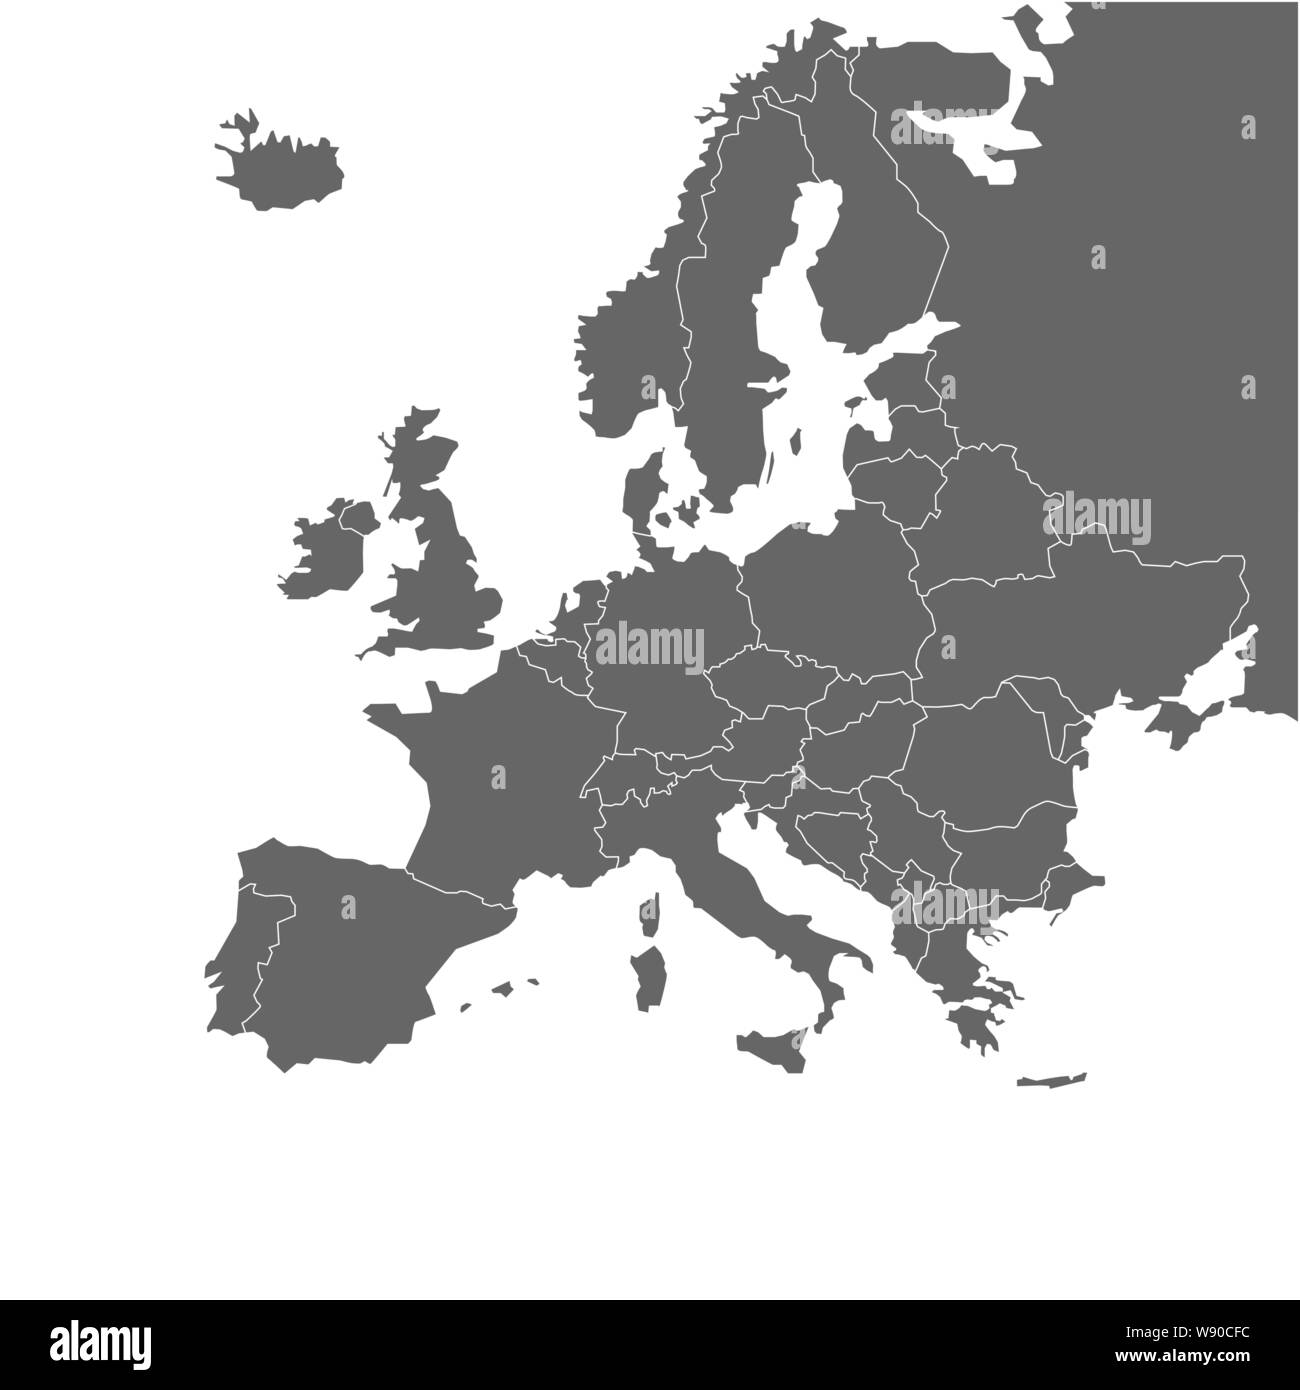 Europe - Political Map of Europe Stock Vector